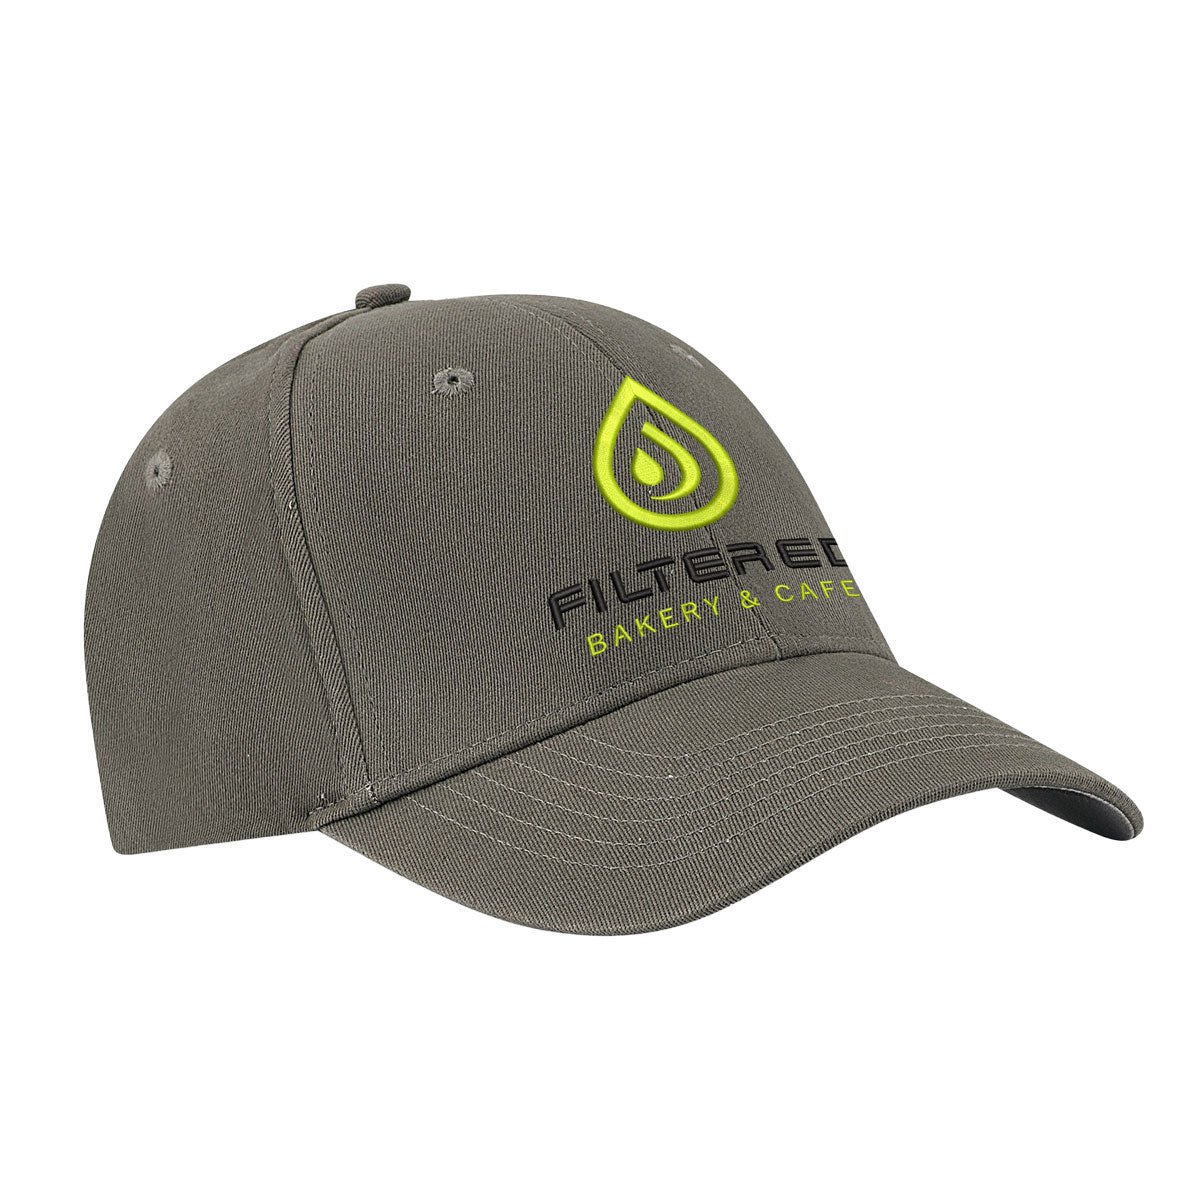 NU-FIT® pro style spandex fitted cap - Custom Embroidered - KC3000